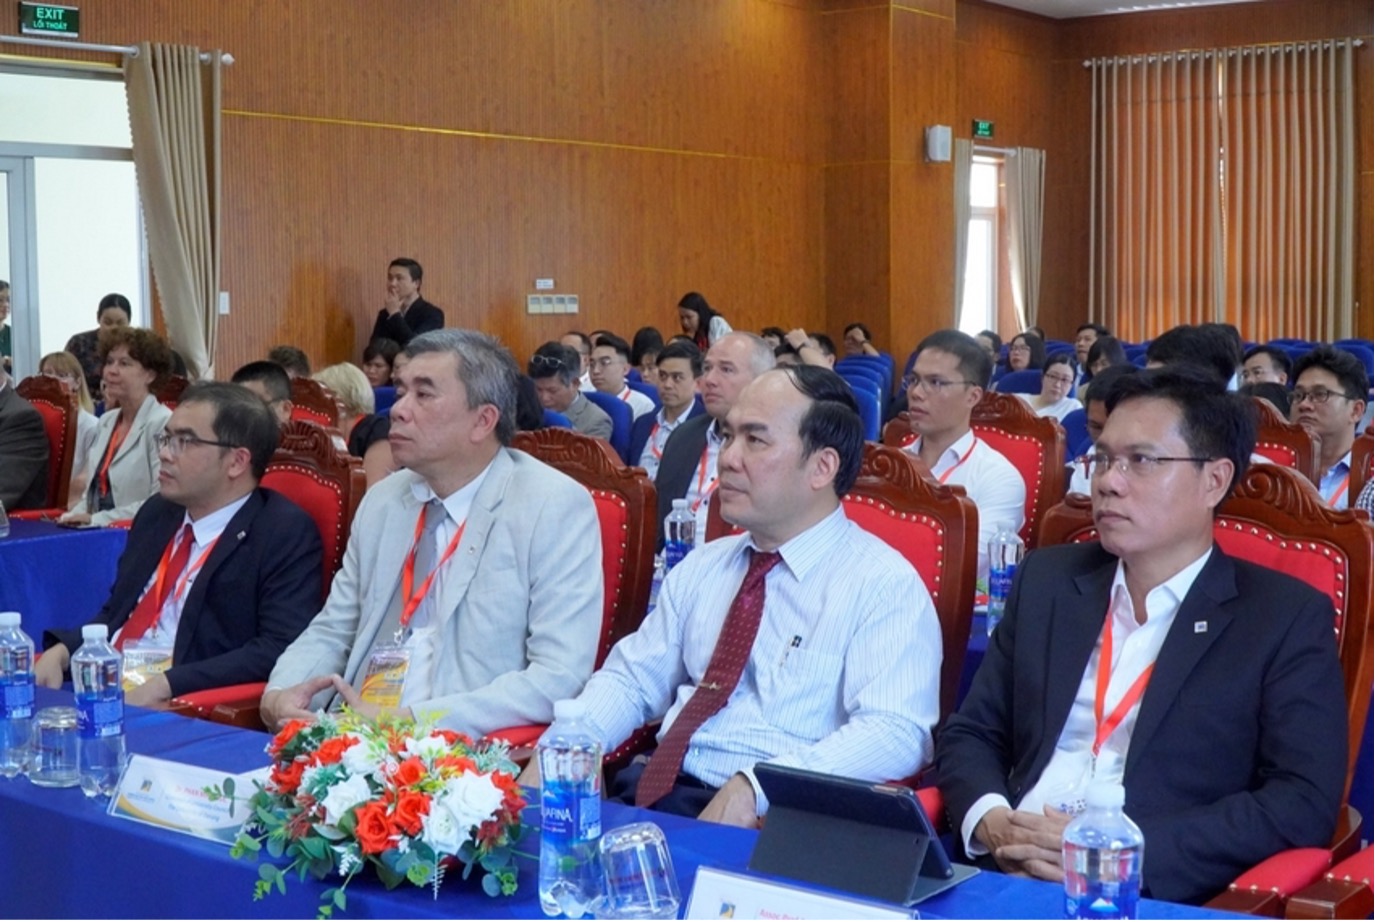 The University of Danang - University of Science and Technology has strategically improved its academic quality and prepared for international accreditation according to ASIIN international standards